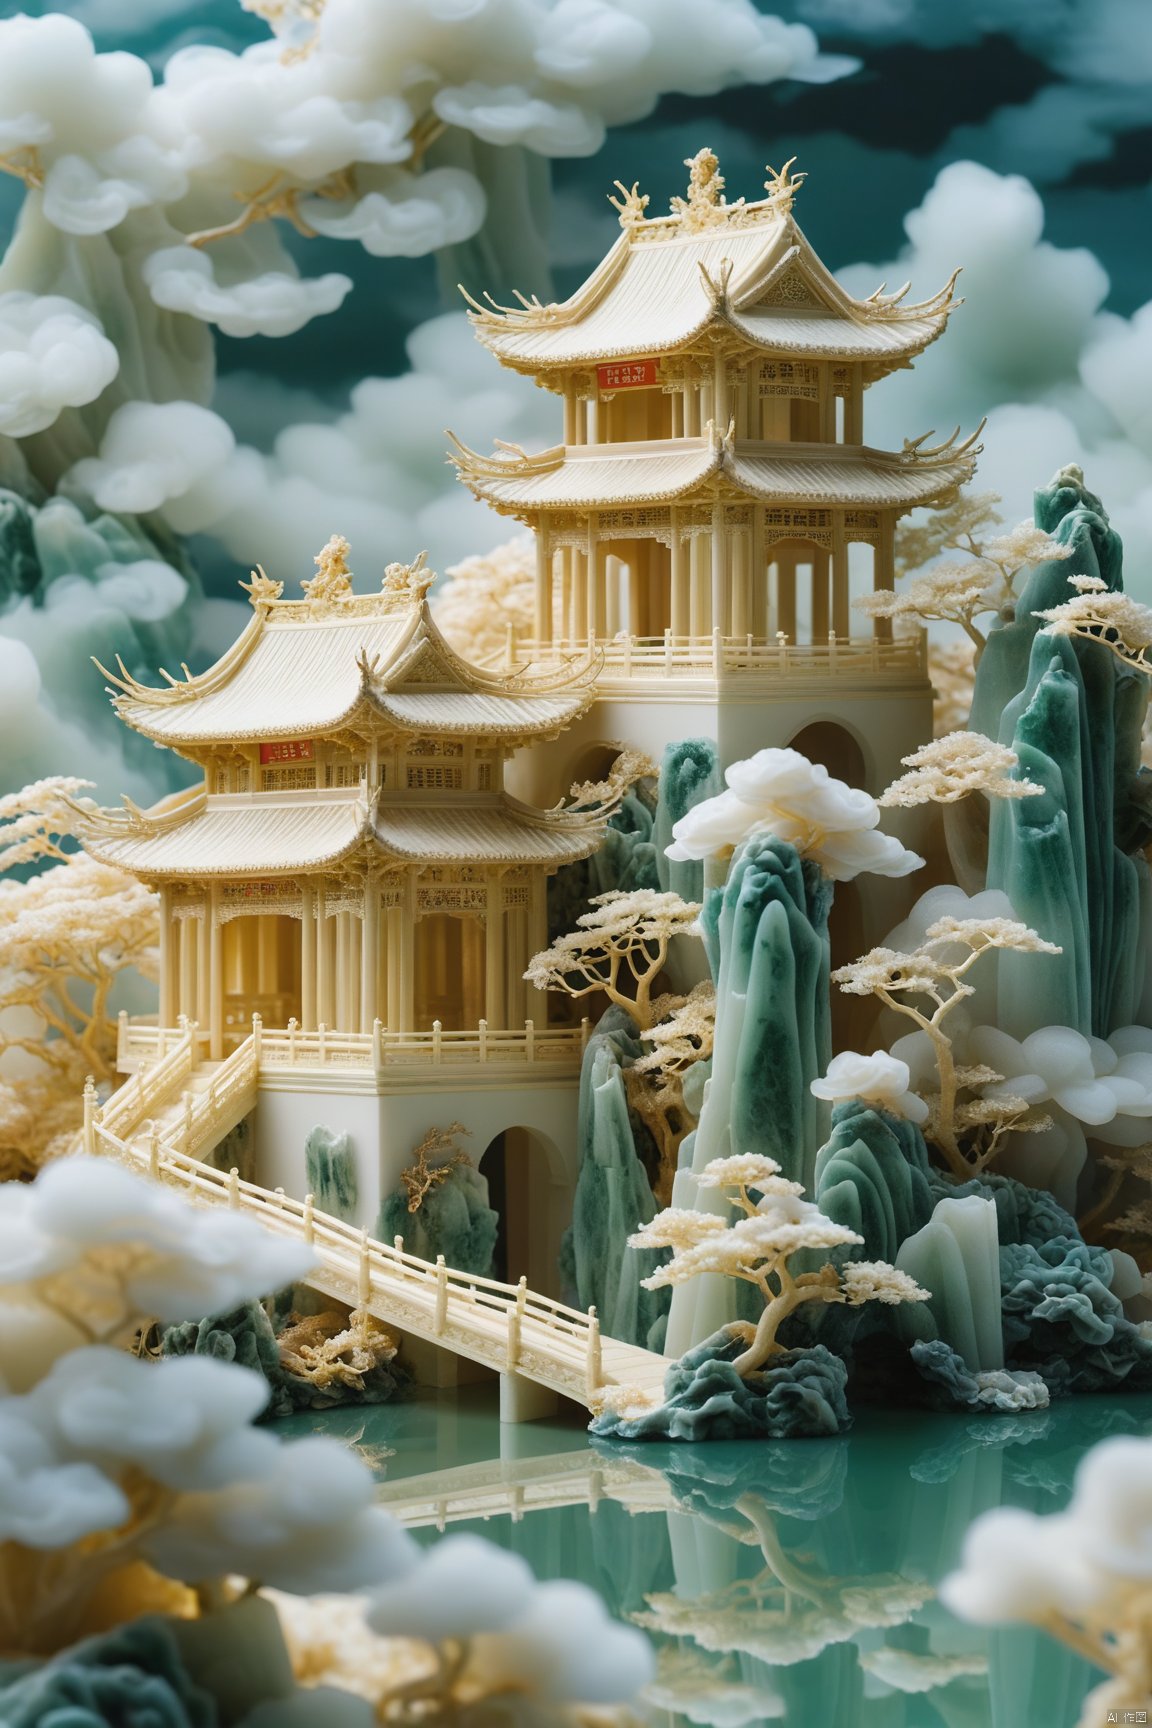  HUBG_Chinese_Jade, Palace,wide shot,
Splendid palace, clouds floating, cranes flying,
Pavilions and pavilions, winding water,